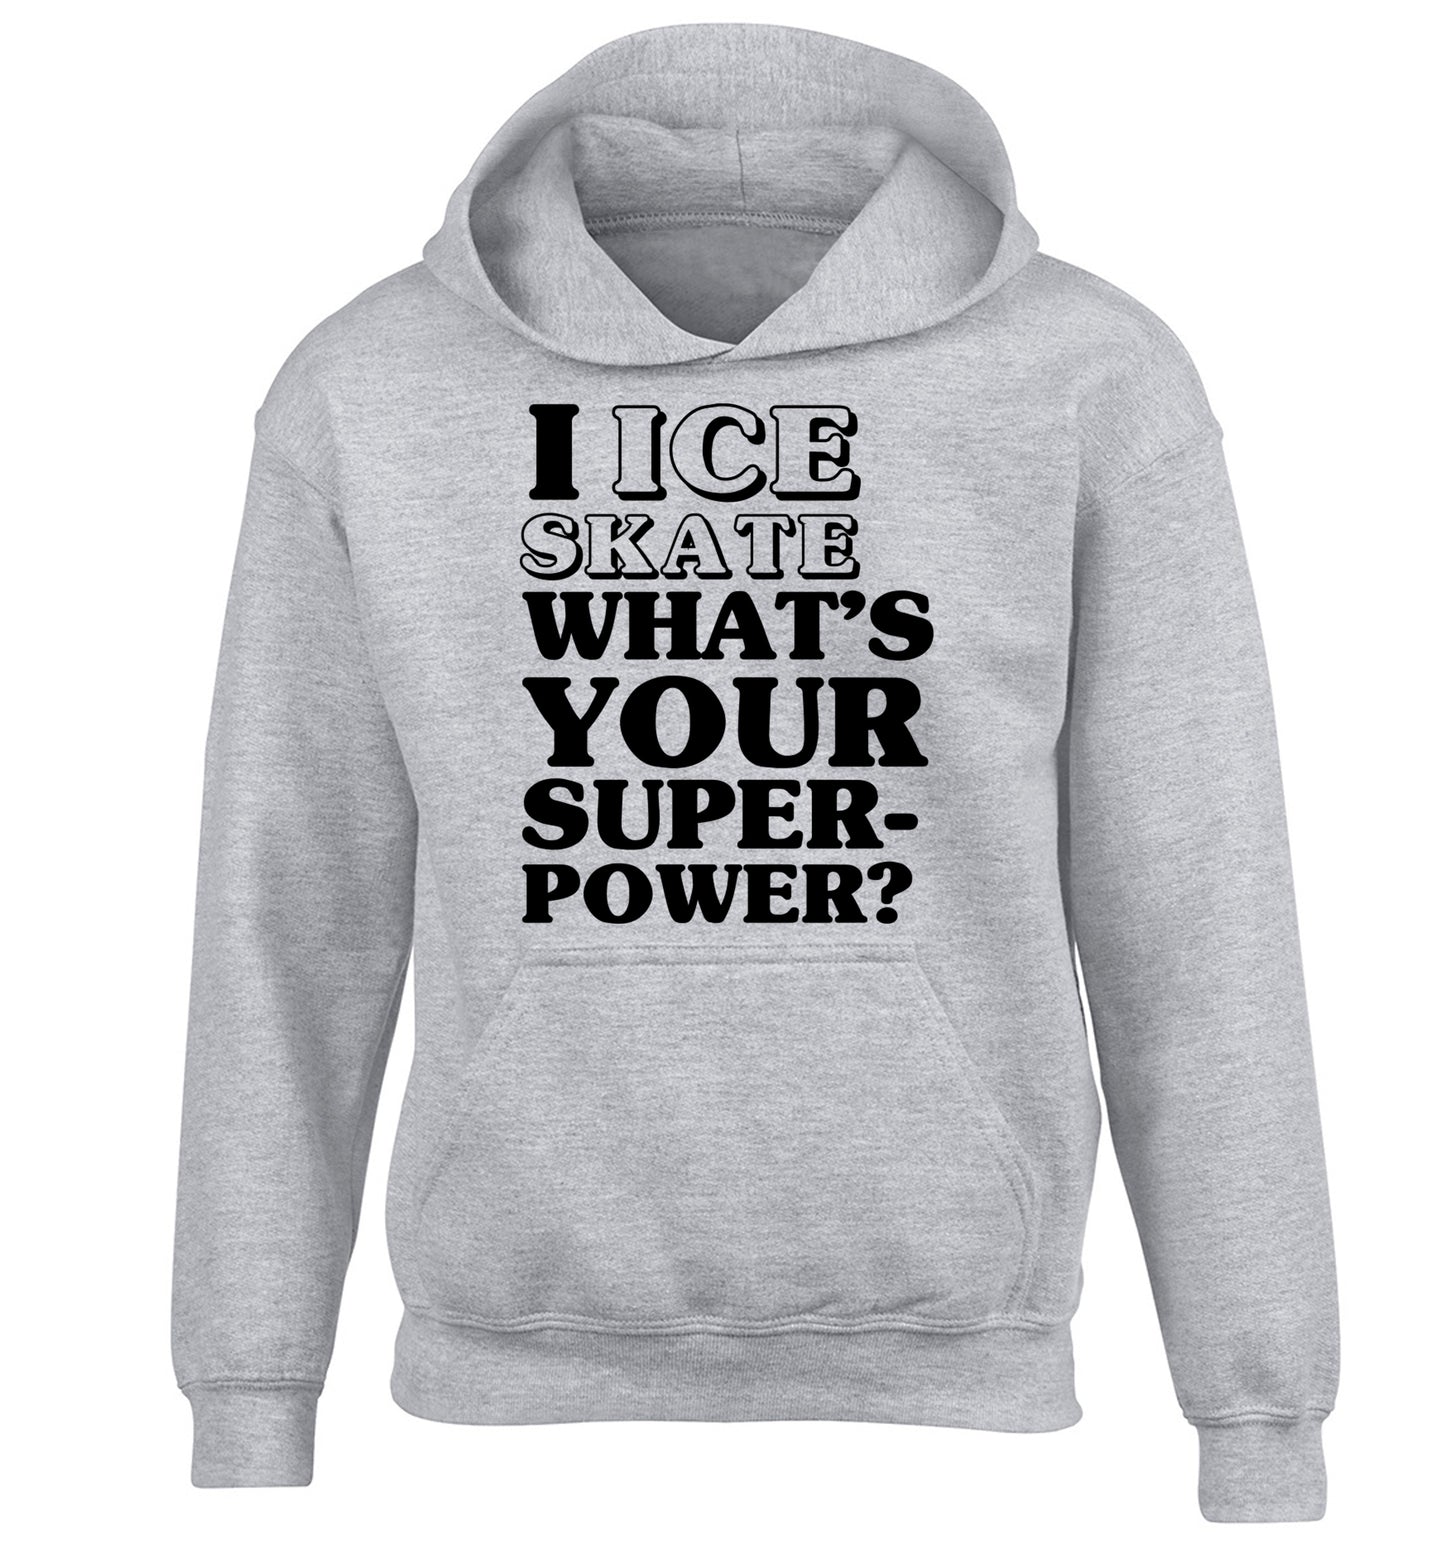 I ice skate what's your superpower? children's grey hoodie 12-14 Years